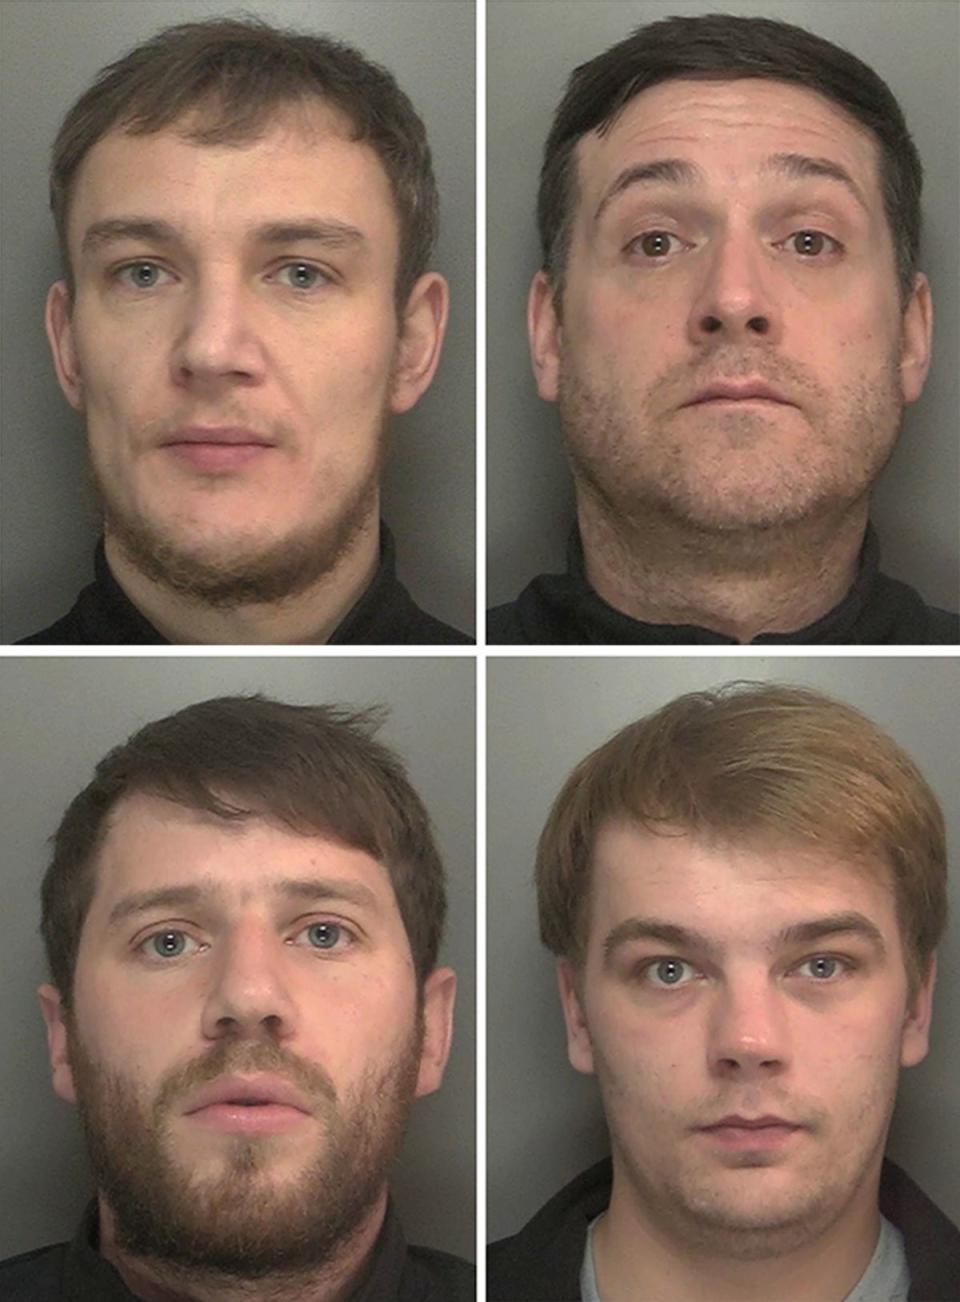 Clockwise from top left: Joseph Peers, James Witham, Niall Barry and Sean Zeisz, who have been jailed for Ms Dale’s murder (PA)